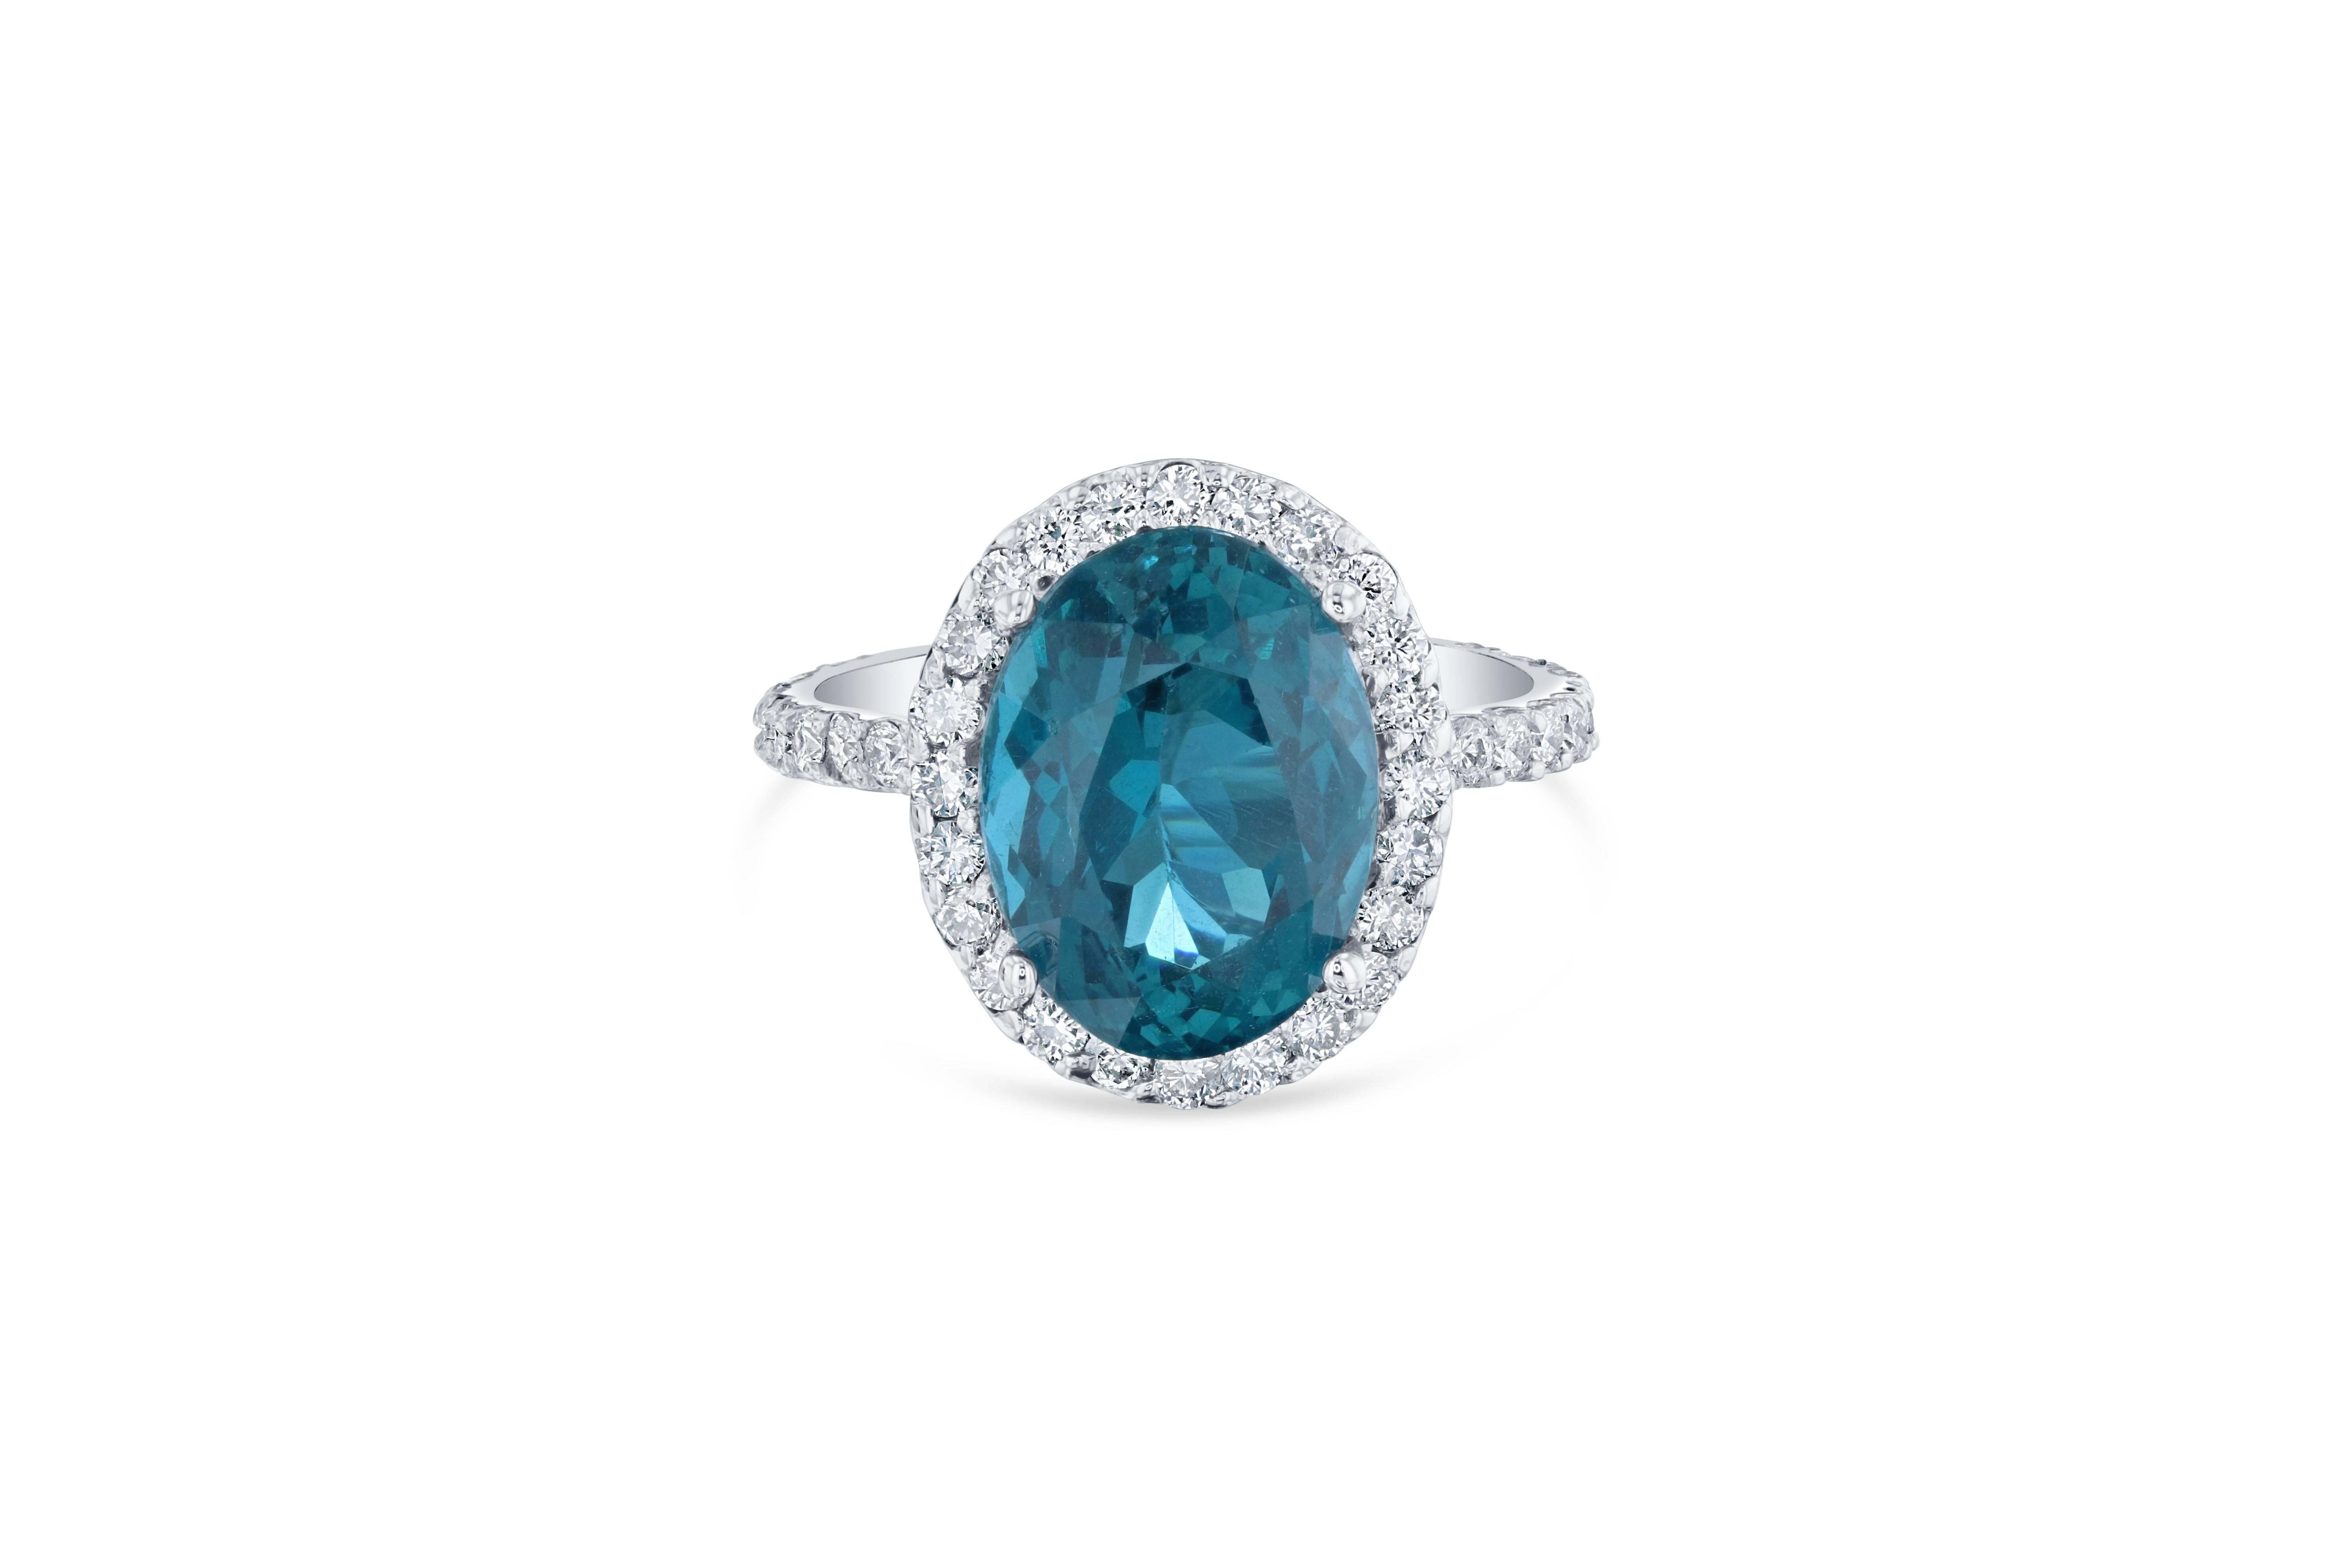 This ring has a 6.07 carat Oval Cut Apatite in the center of the ring and is surrounded by a Halo of 48 Round Cut Diamonds that weigh 0.88 carat Clarity: VS2, Color: H. 

The total carat weight of the ring is 6.95 carats. The ring is made in 14K